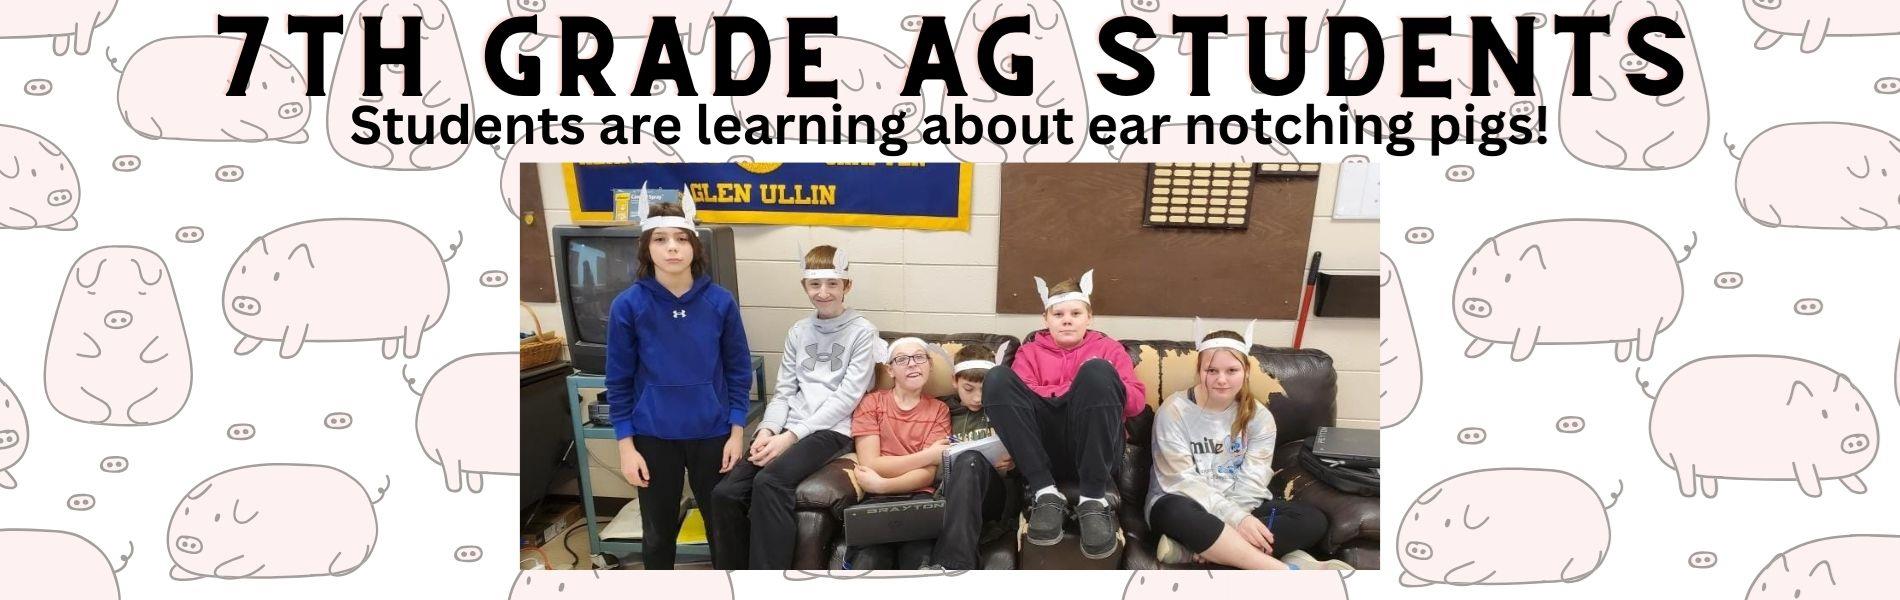 image of students with pig ears on a pig background